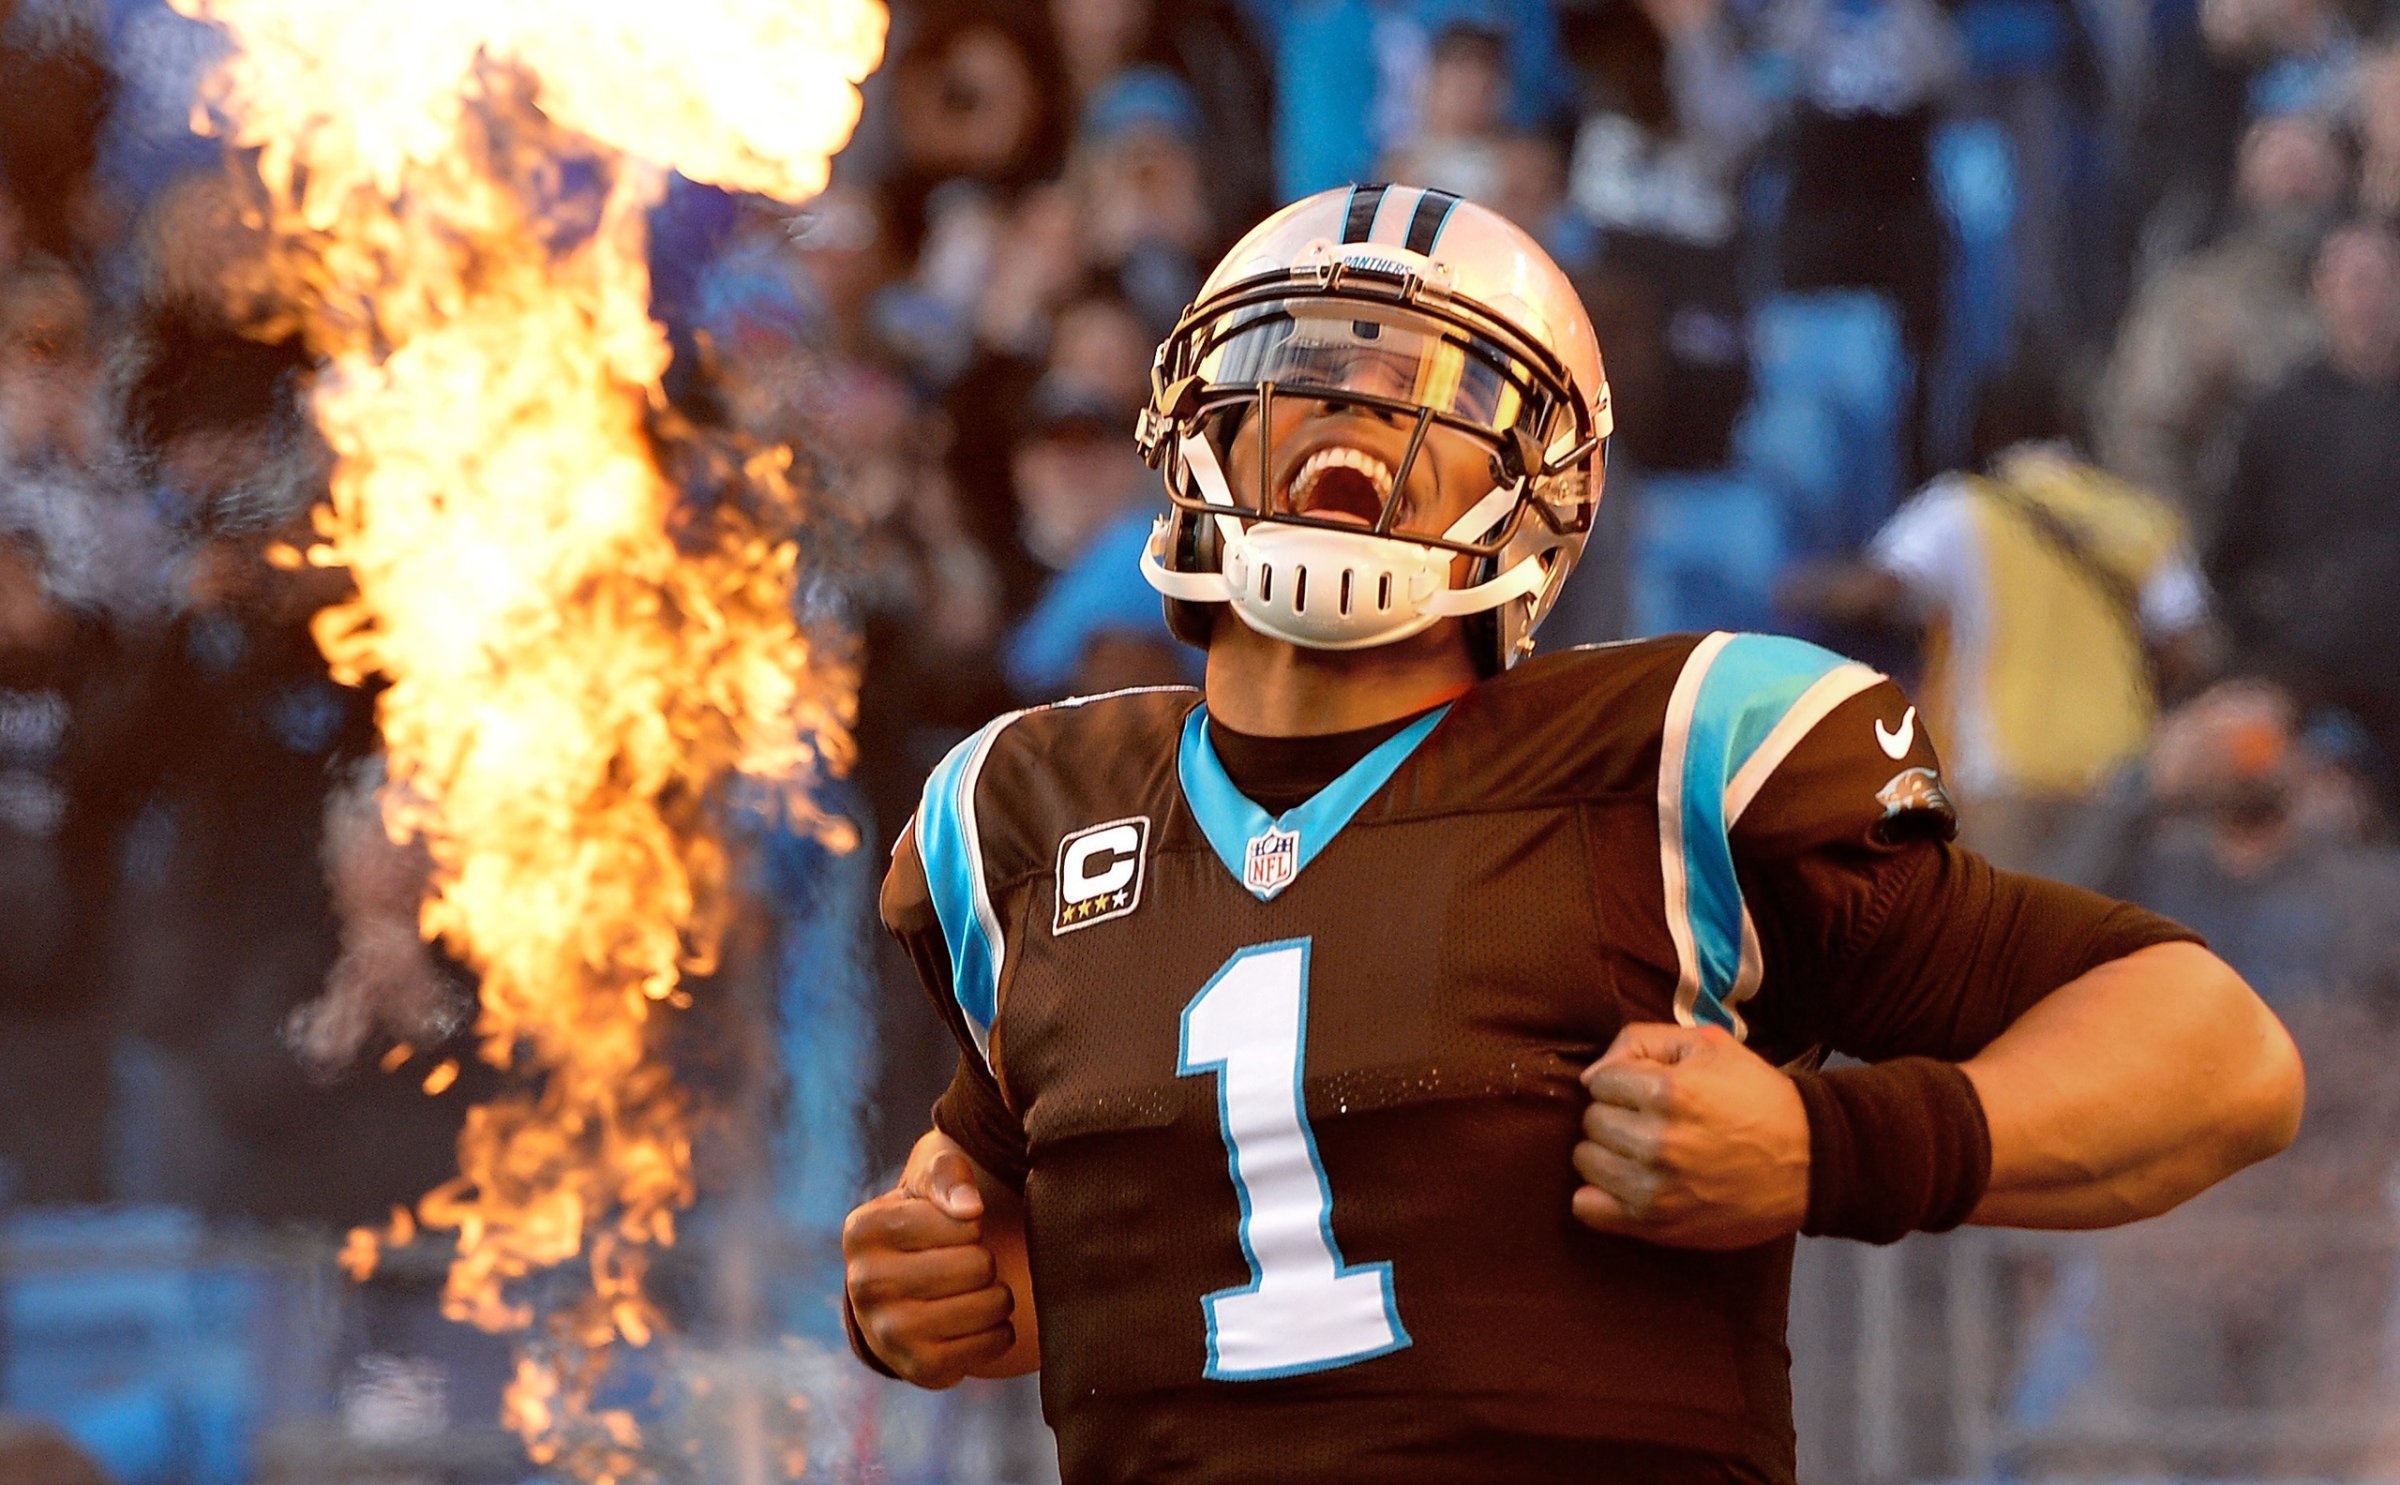 A fired-up Newton will lead Carolina against Denver and Peyton Manning in the Super Bowl on Feb. 7